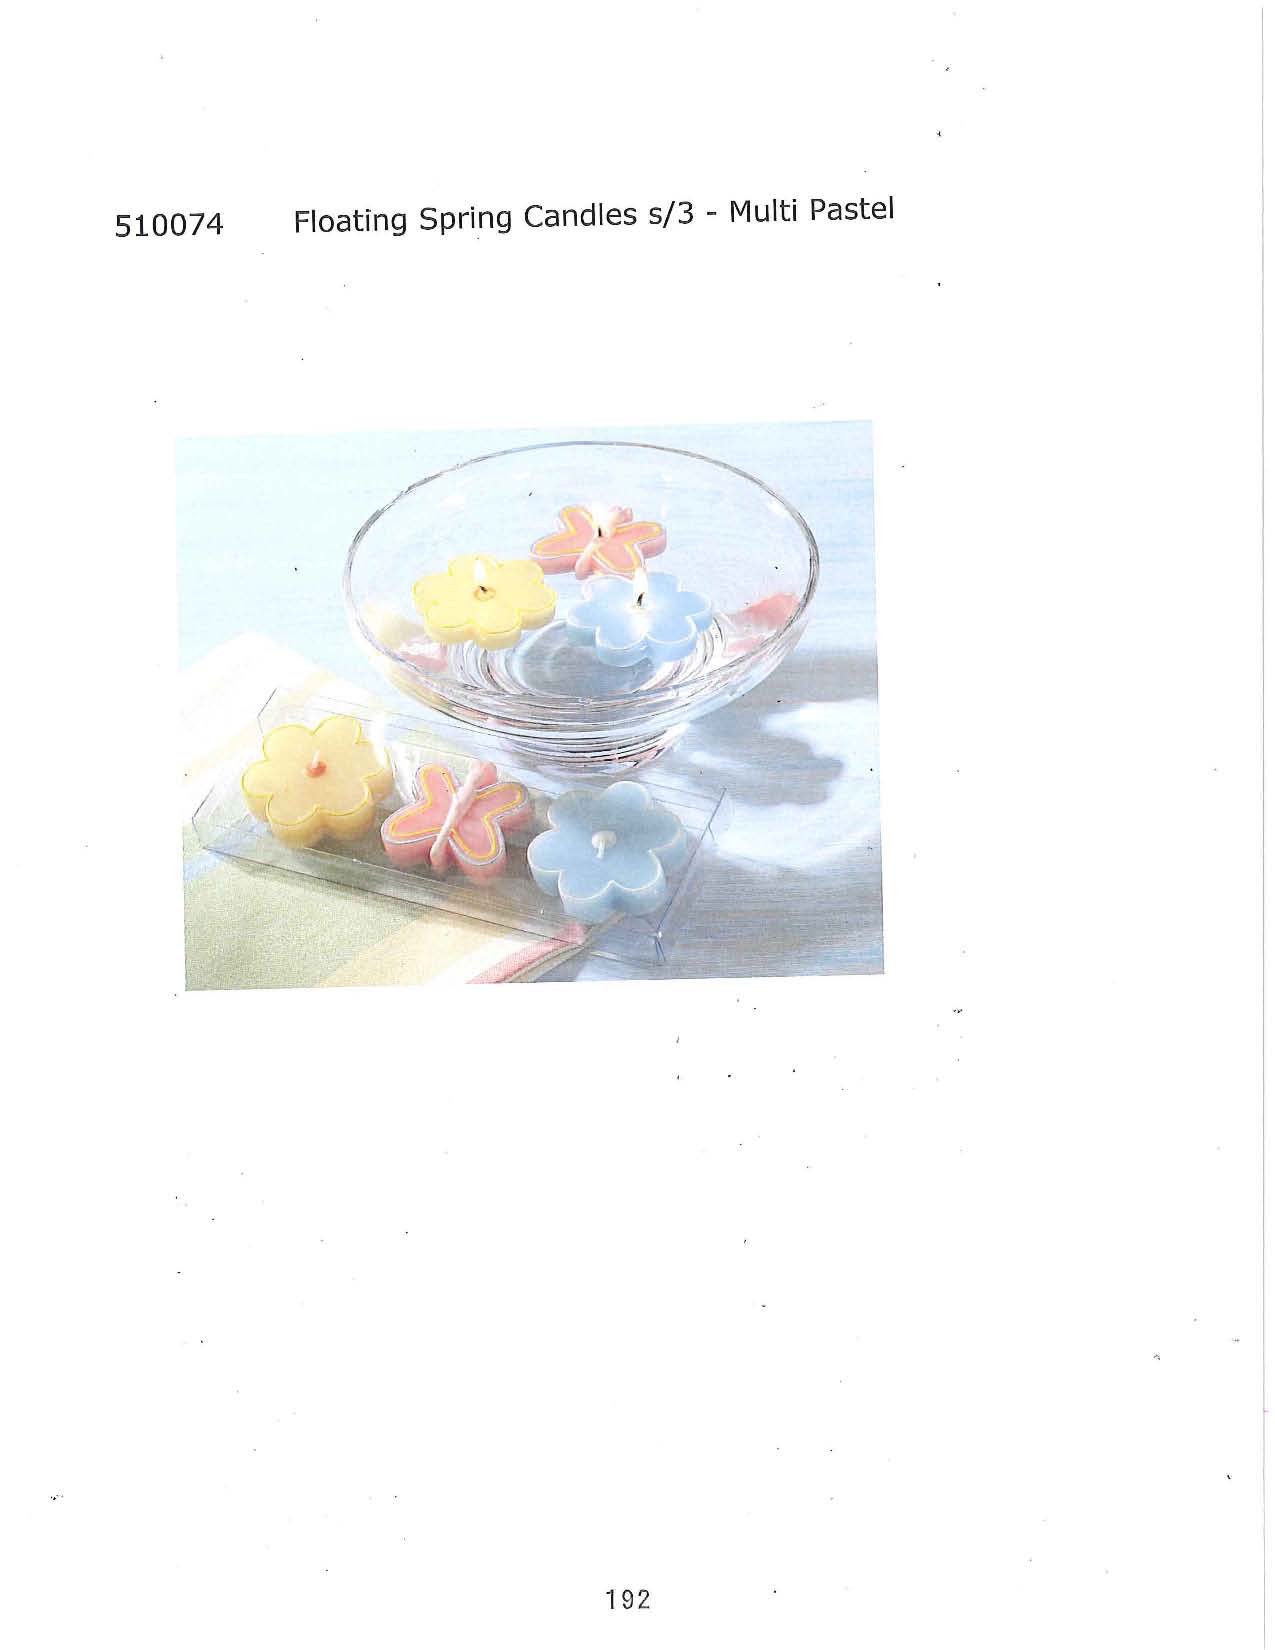 Floating Spring Candle s/3 - Multi Pastel